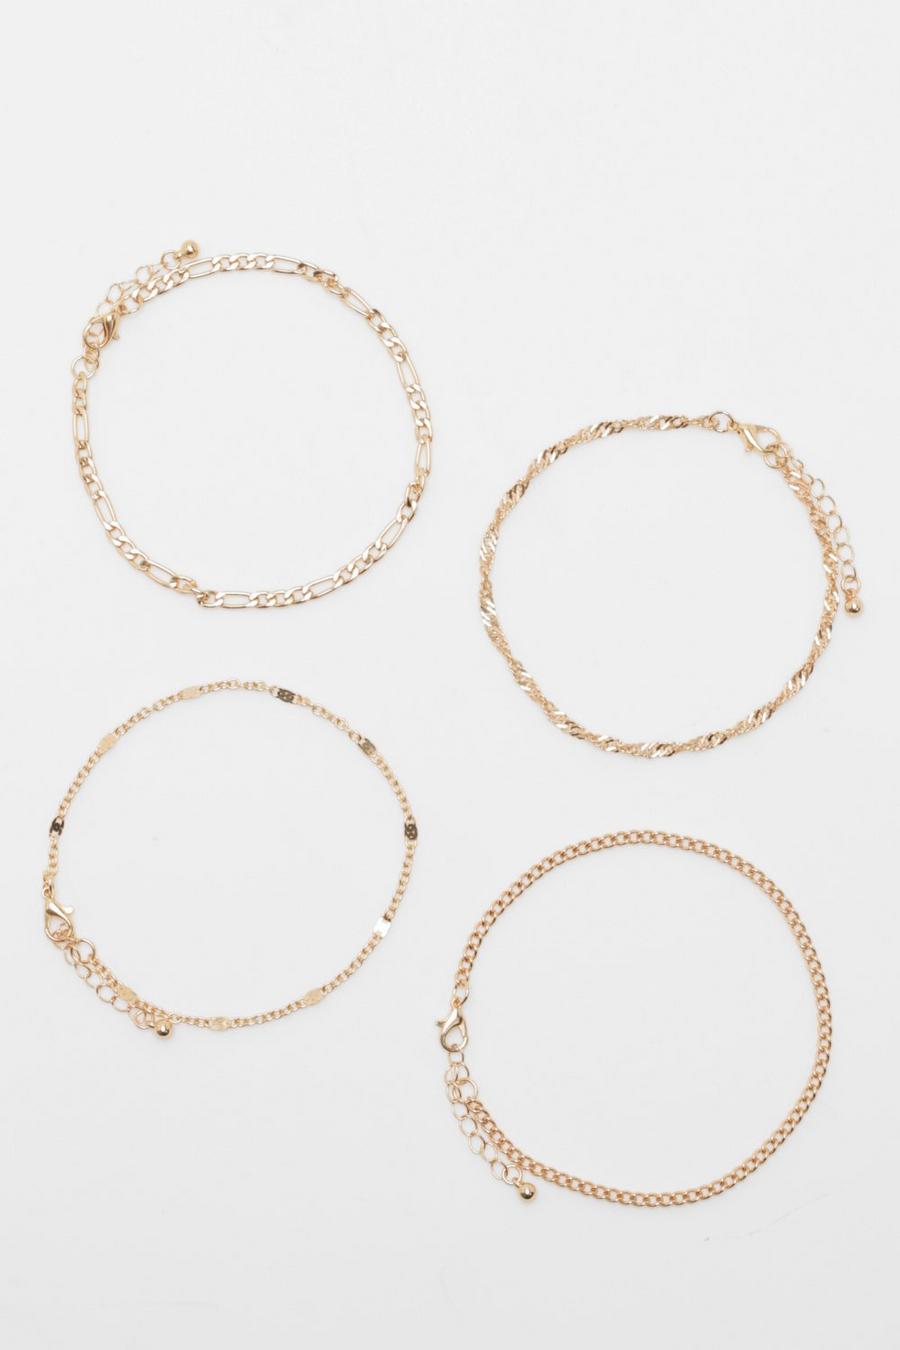 Gold Mix Chain 4 Pack Anklets